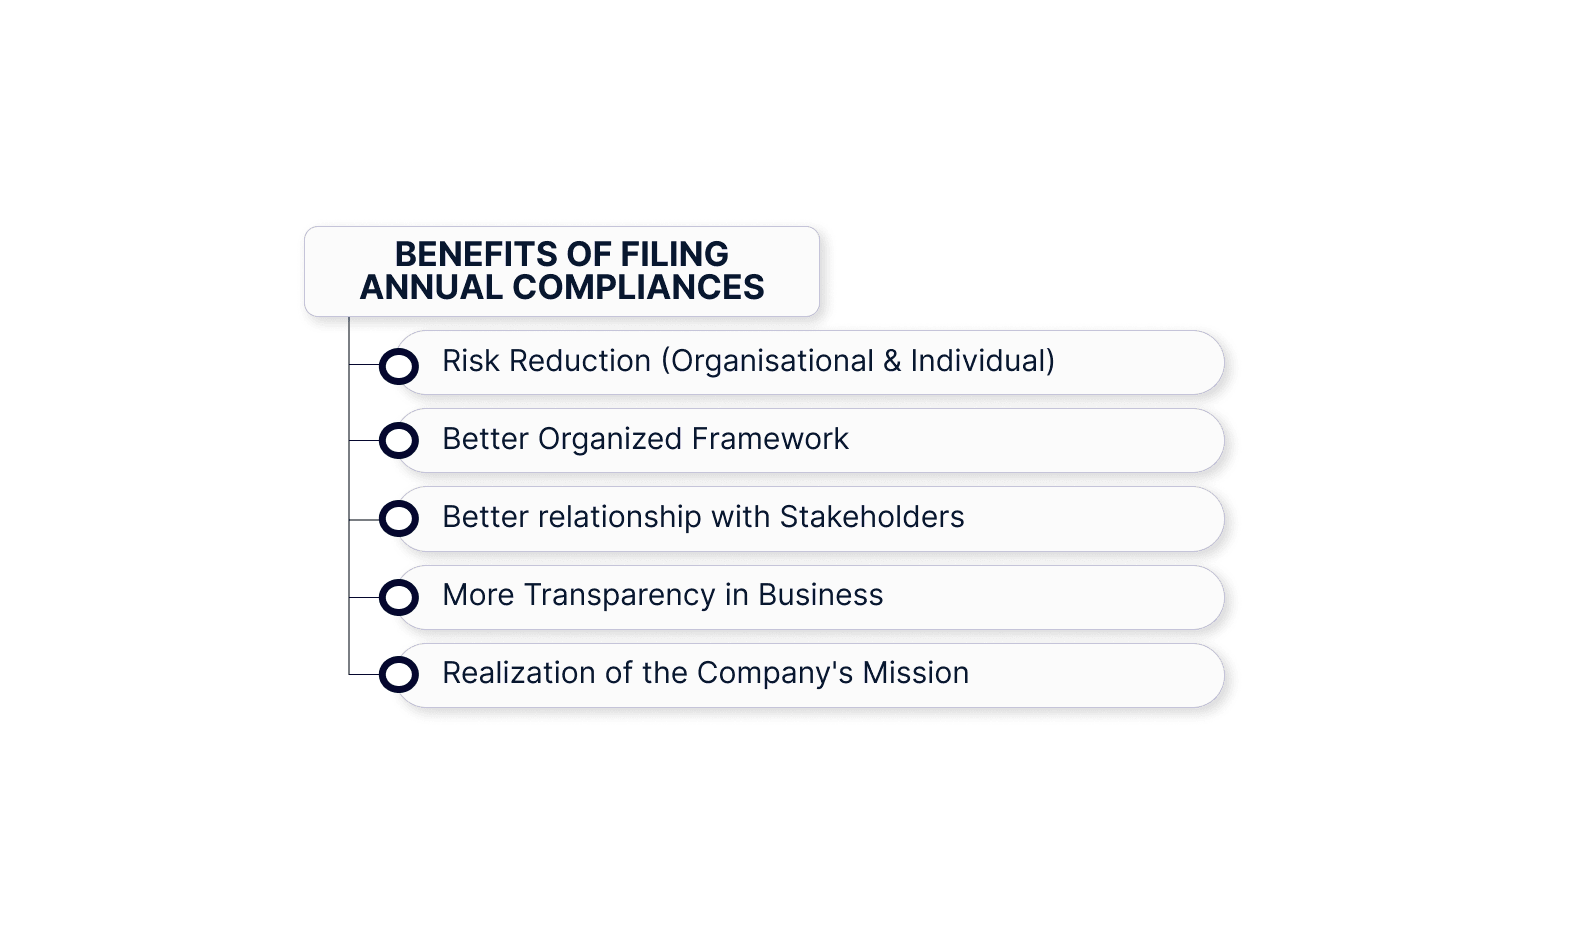 Benefits of filing Annual Compliances